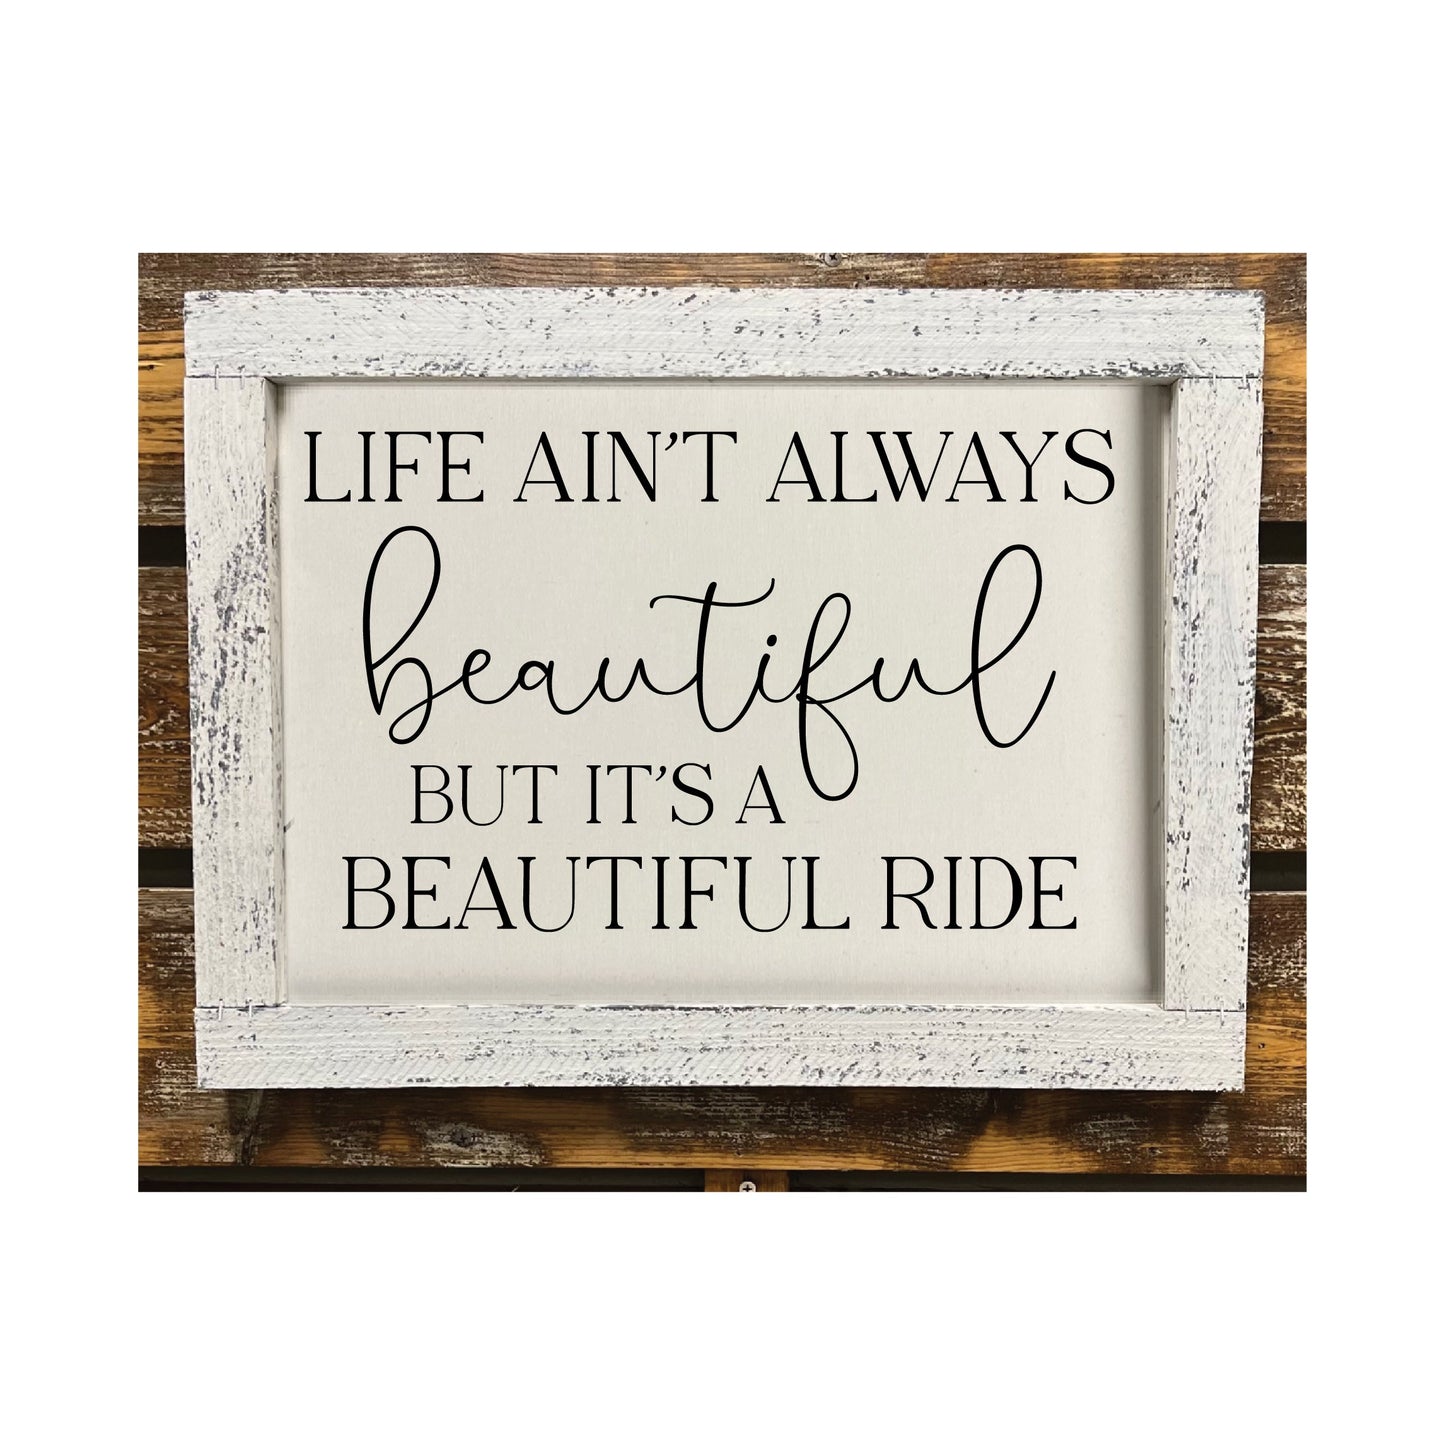 Life Ain't Always Beautiful But It's A Beautiful Ride